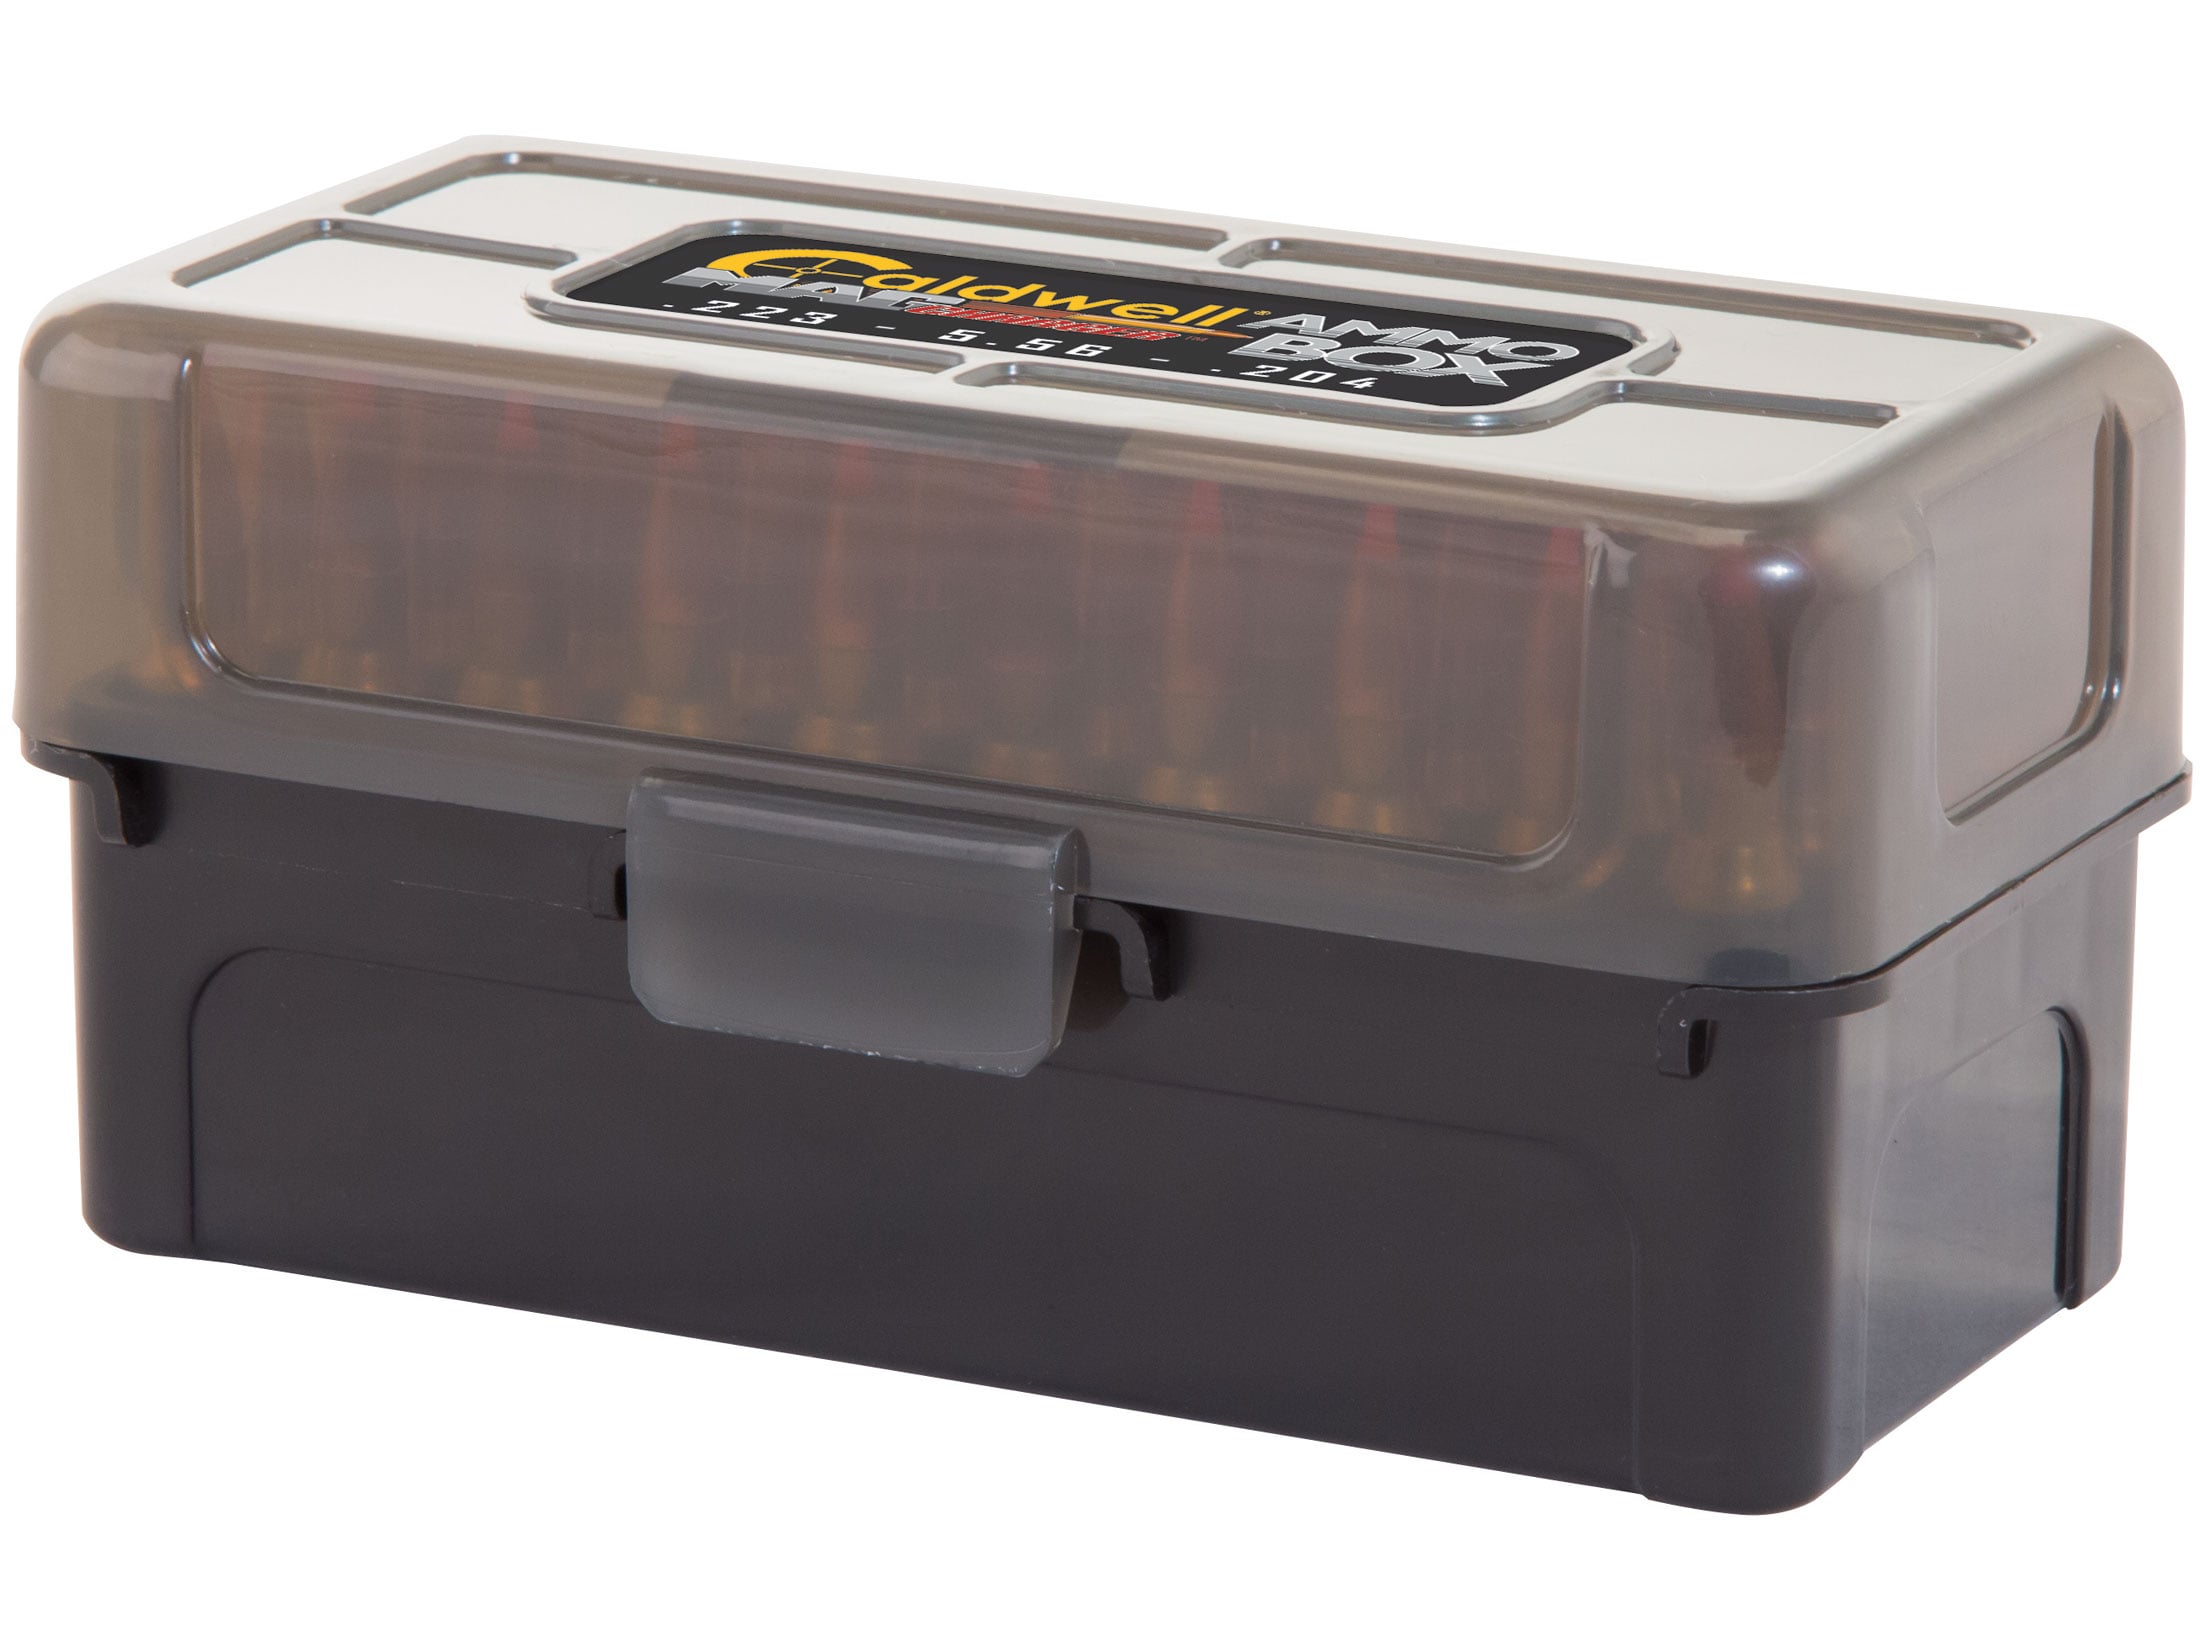 Caldwell AR Mag Charger Flip-Top Ammo Box 204 Ruger, 223 Remington 50-Round Plastic Black and Smoke 5 Pack For Sale